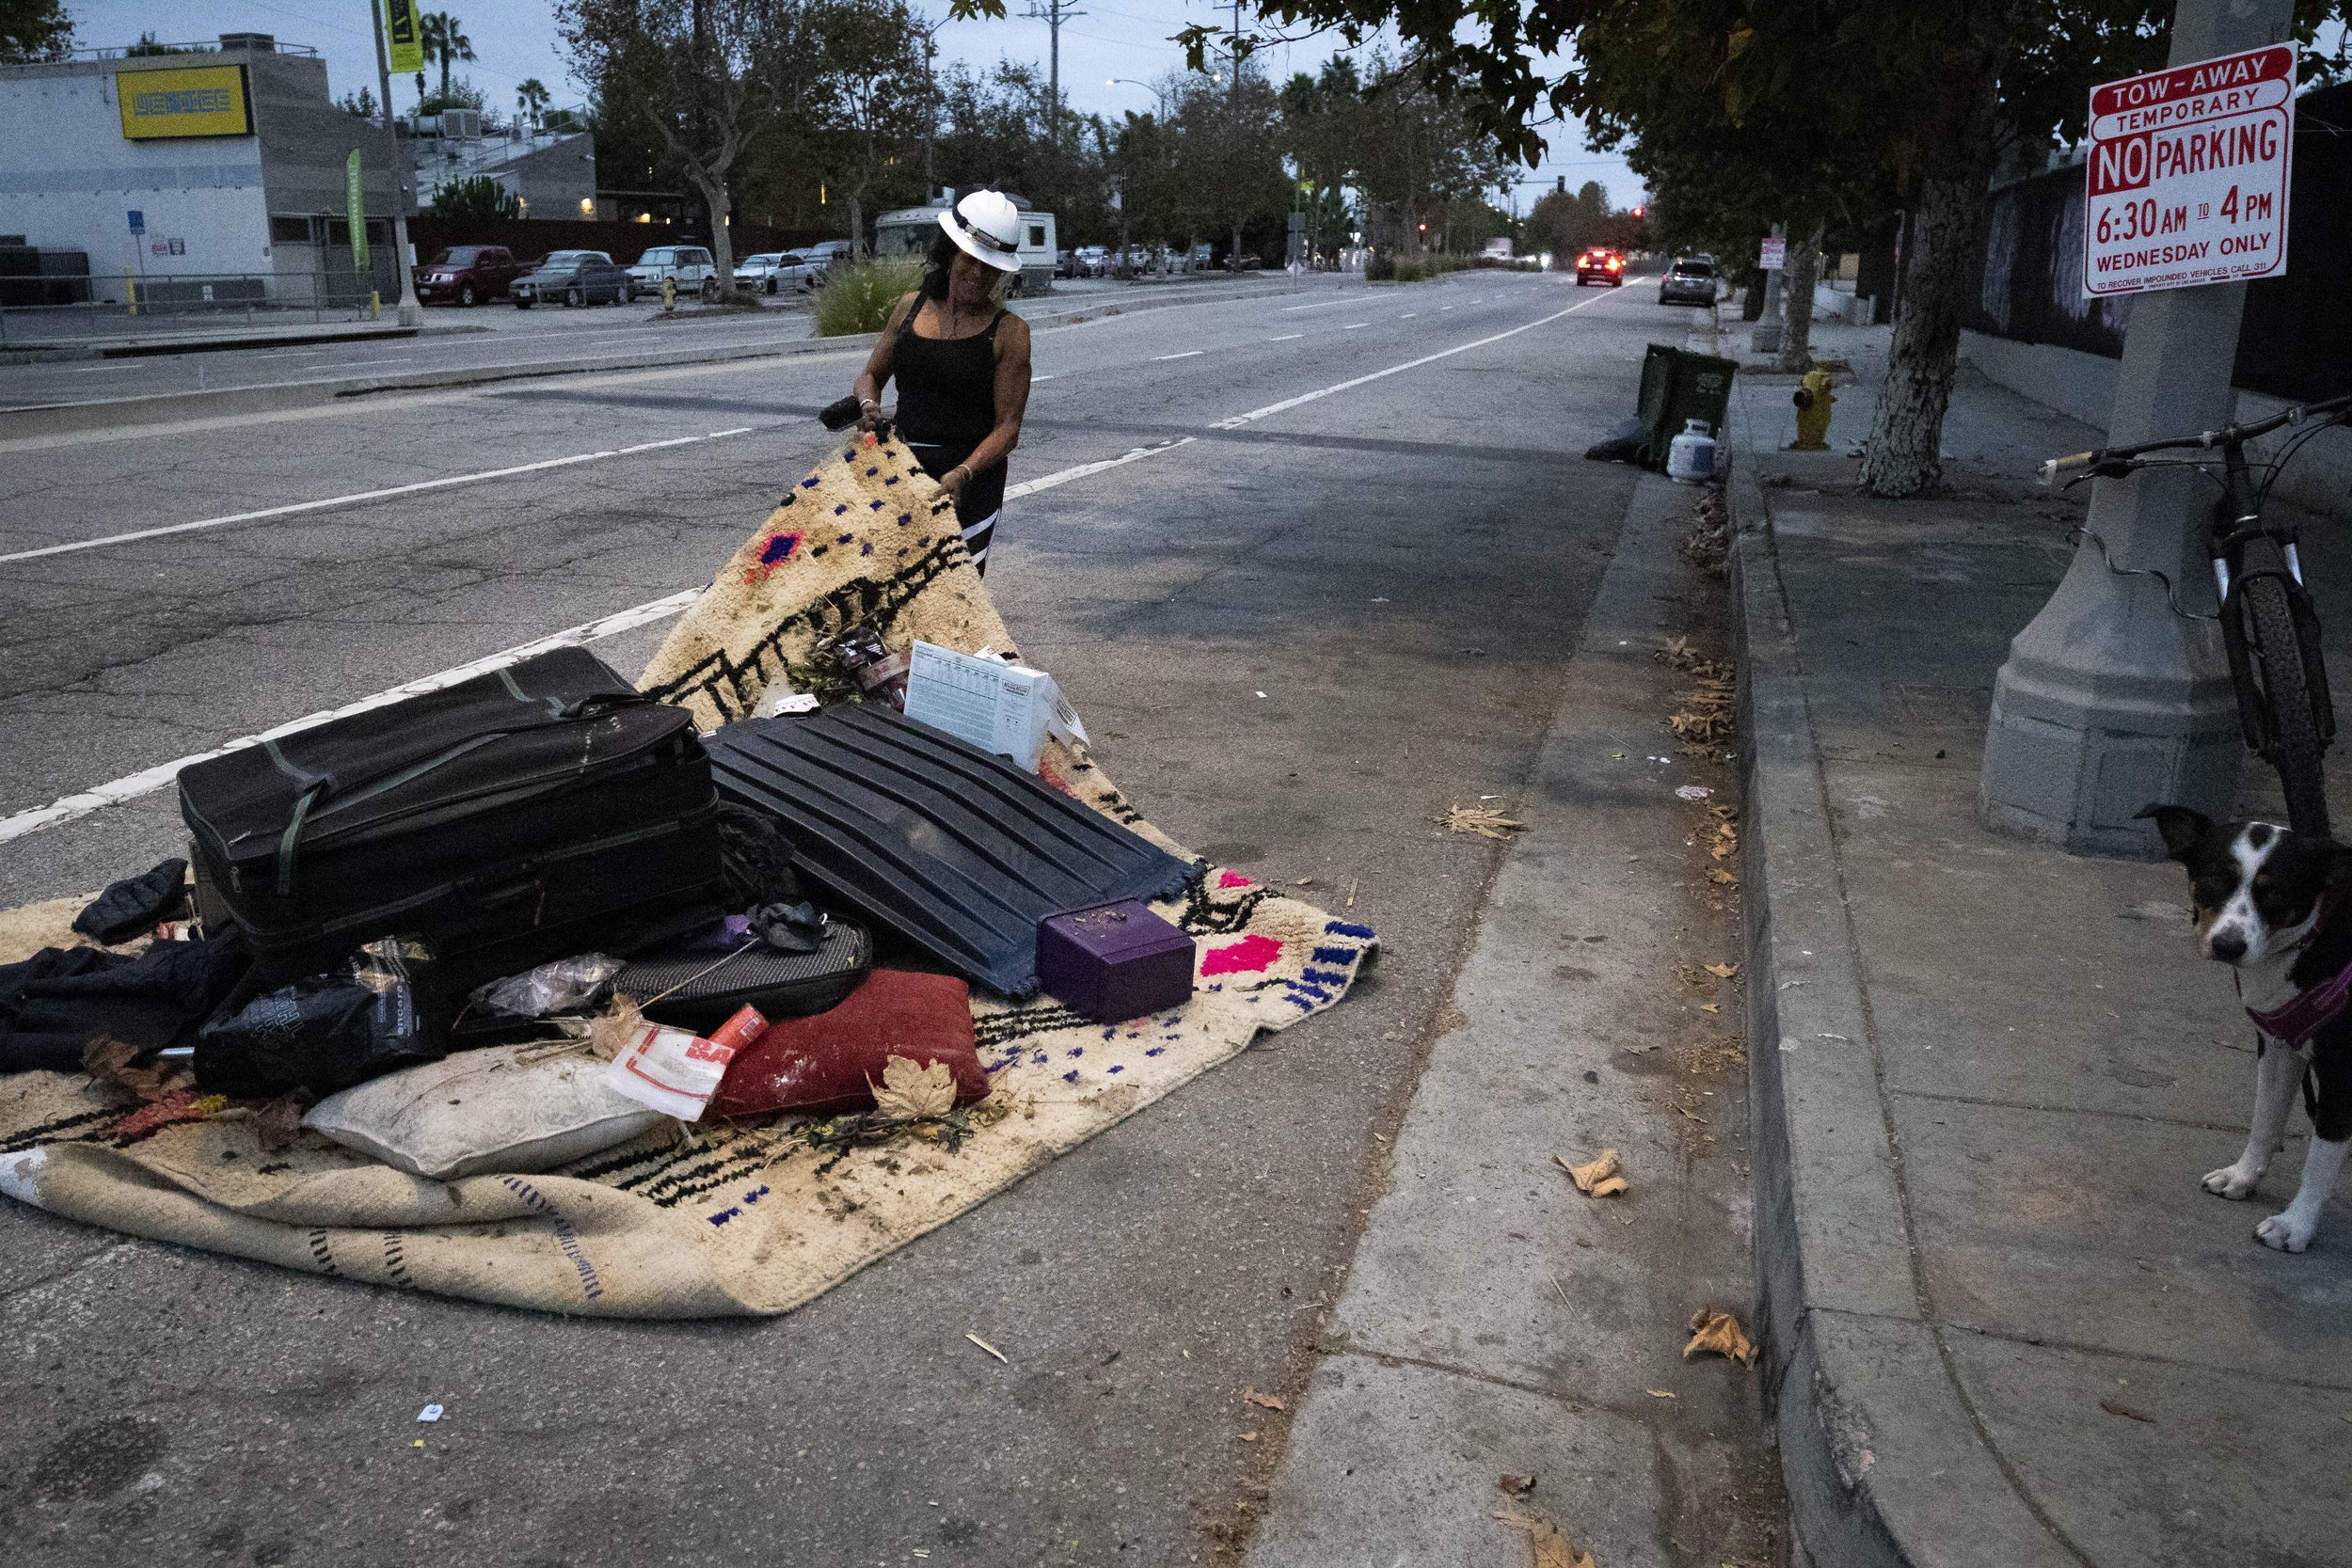  Rebecca Dannenbaum dragging a pile of trash away from the RV she lives in on Venice Blvd. in Los Angeles, Calif., on Monday, Oct. 23, 2023. She says that she piles trash up to make it easier for sanitation teams to take, but they never do. So, she m